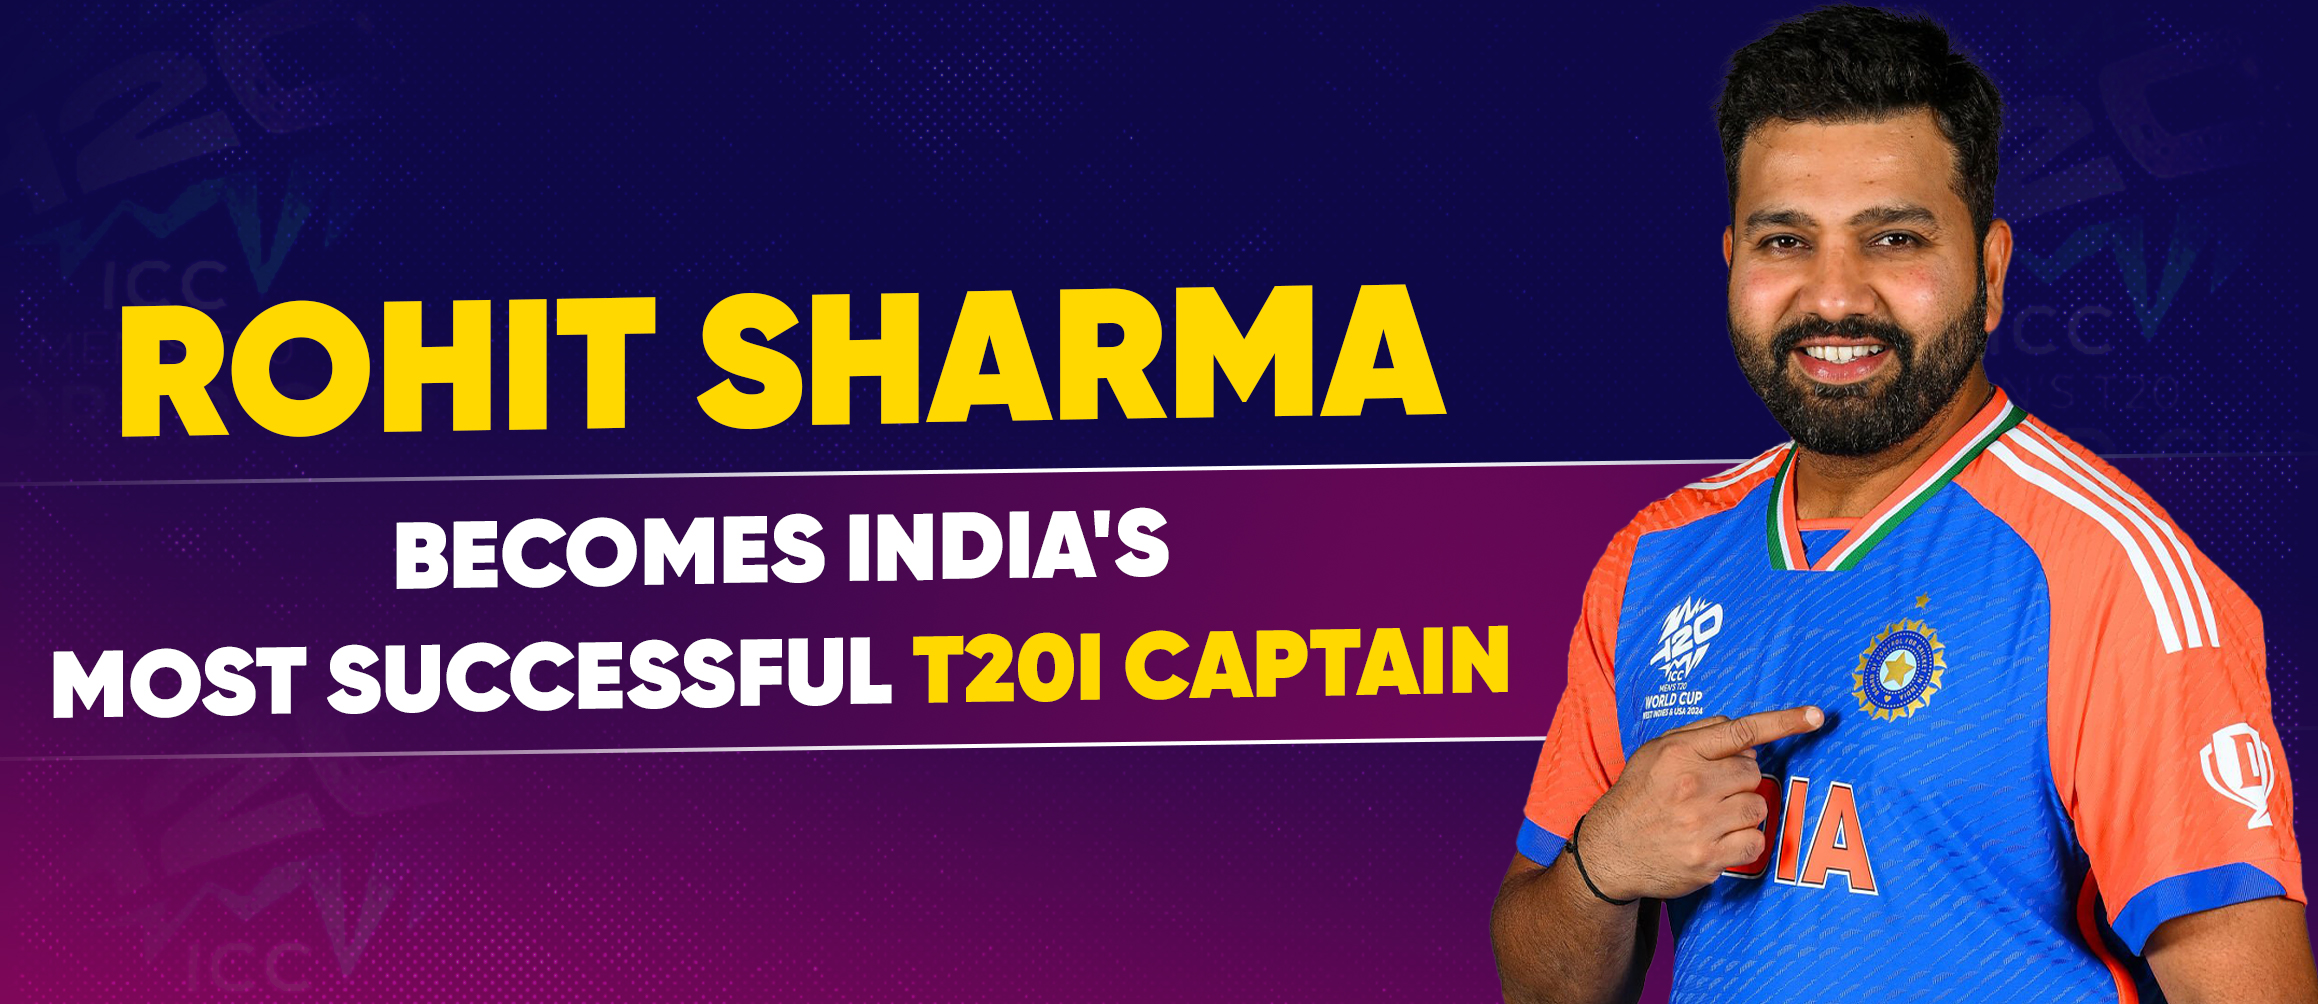 Rohit Sharma Becomes India’s Most Successful T20I Captain